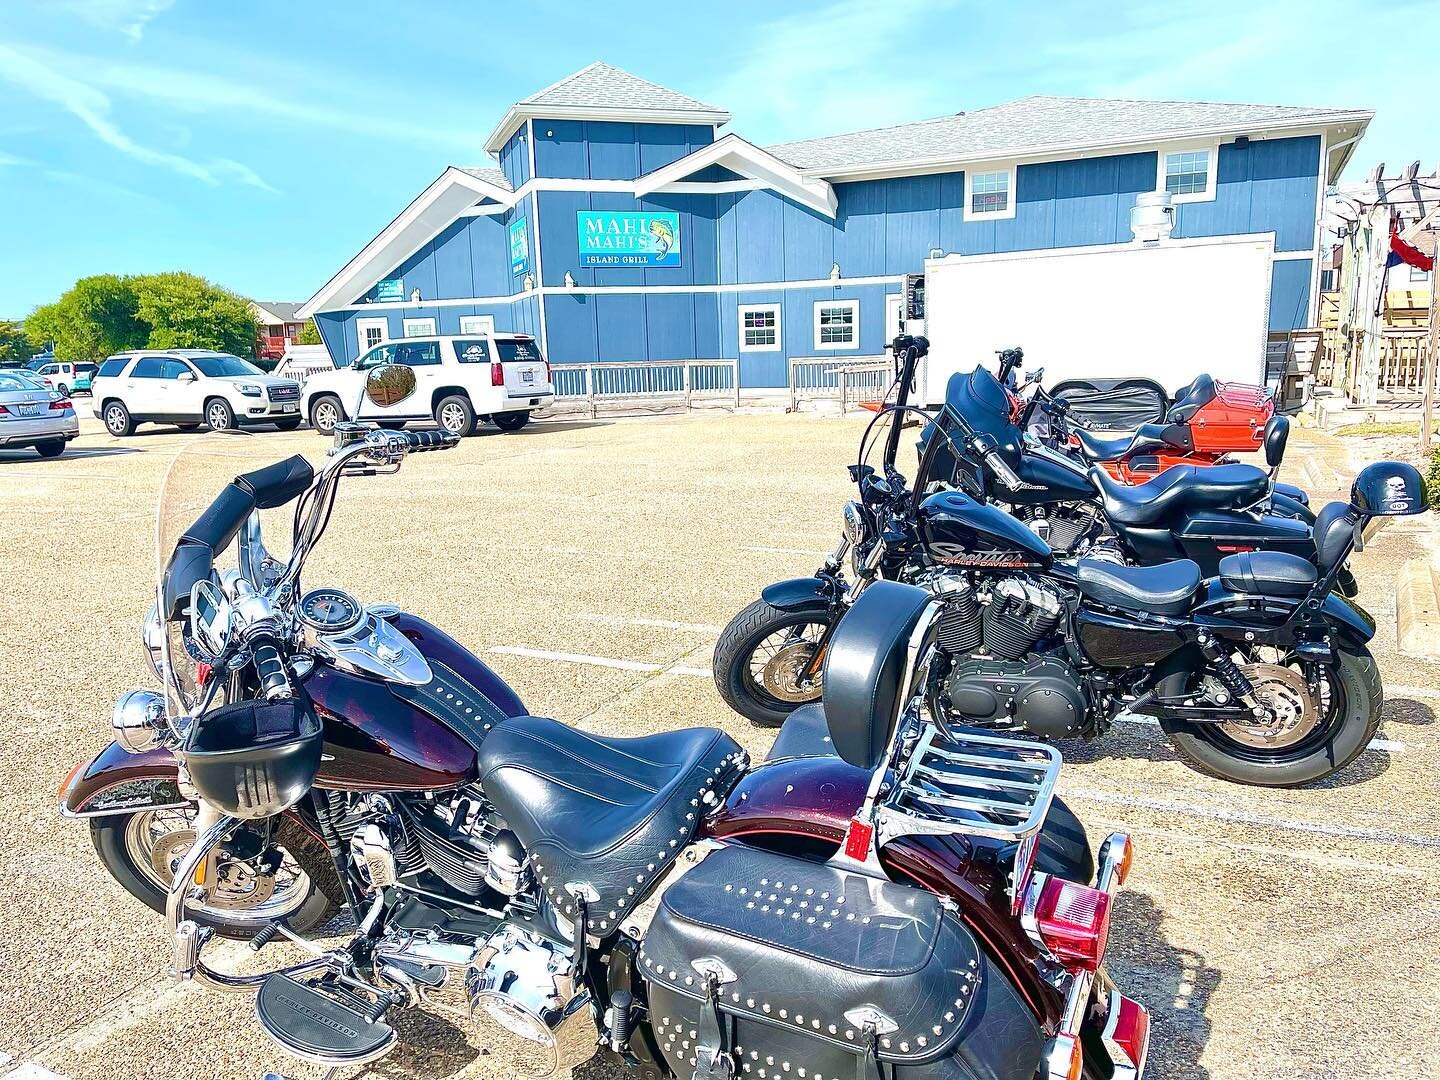 Welcome, bikers! Cruise on over to our restaurant while you are in Bike Week here in the Outer Banks and
grab a bite to eat. We've got delicious food and a warm welcome waiting for you. #BikeWeek #OuterBanks